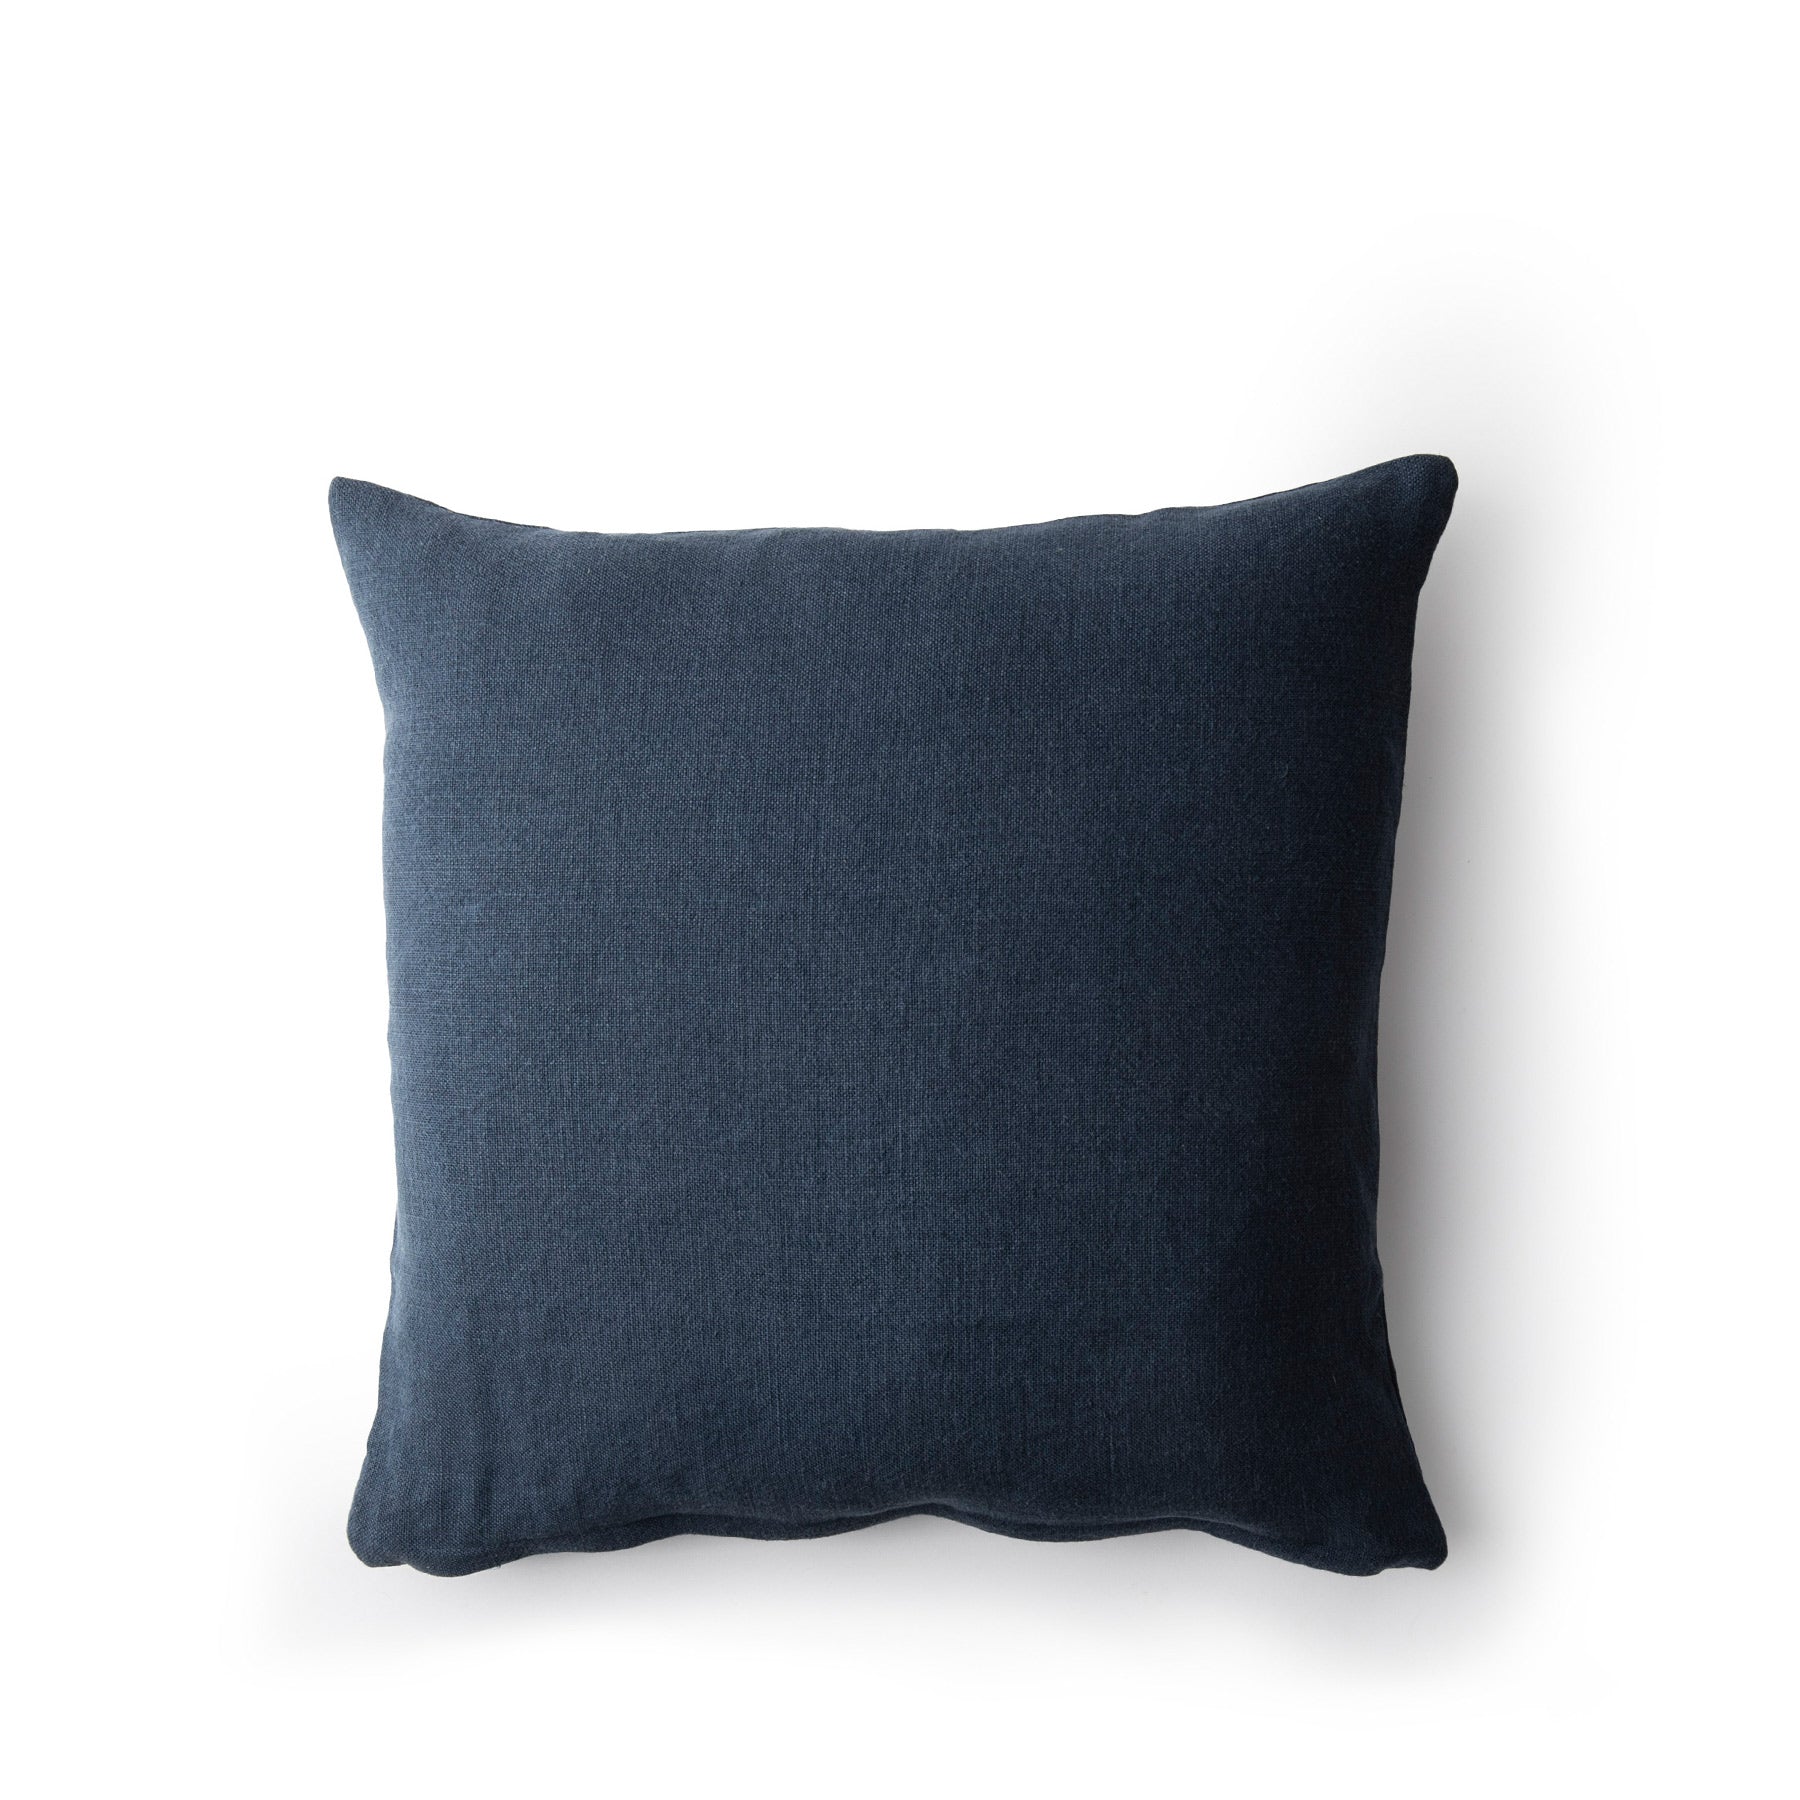 Hudson Pillow in Navy Zoom Image 1